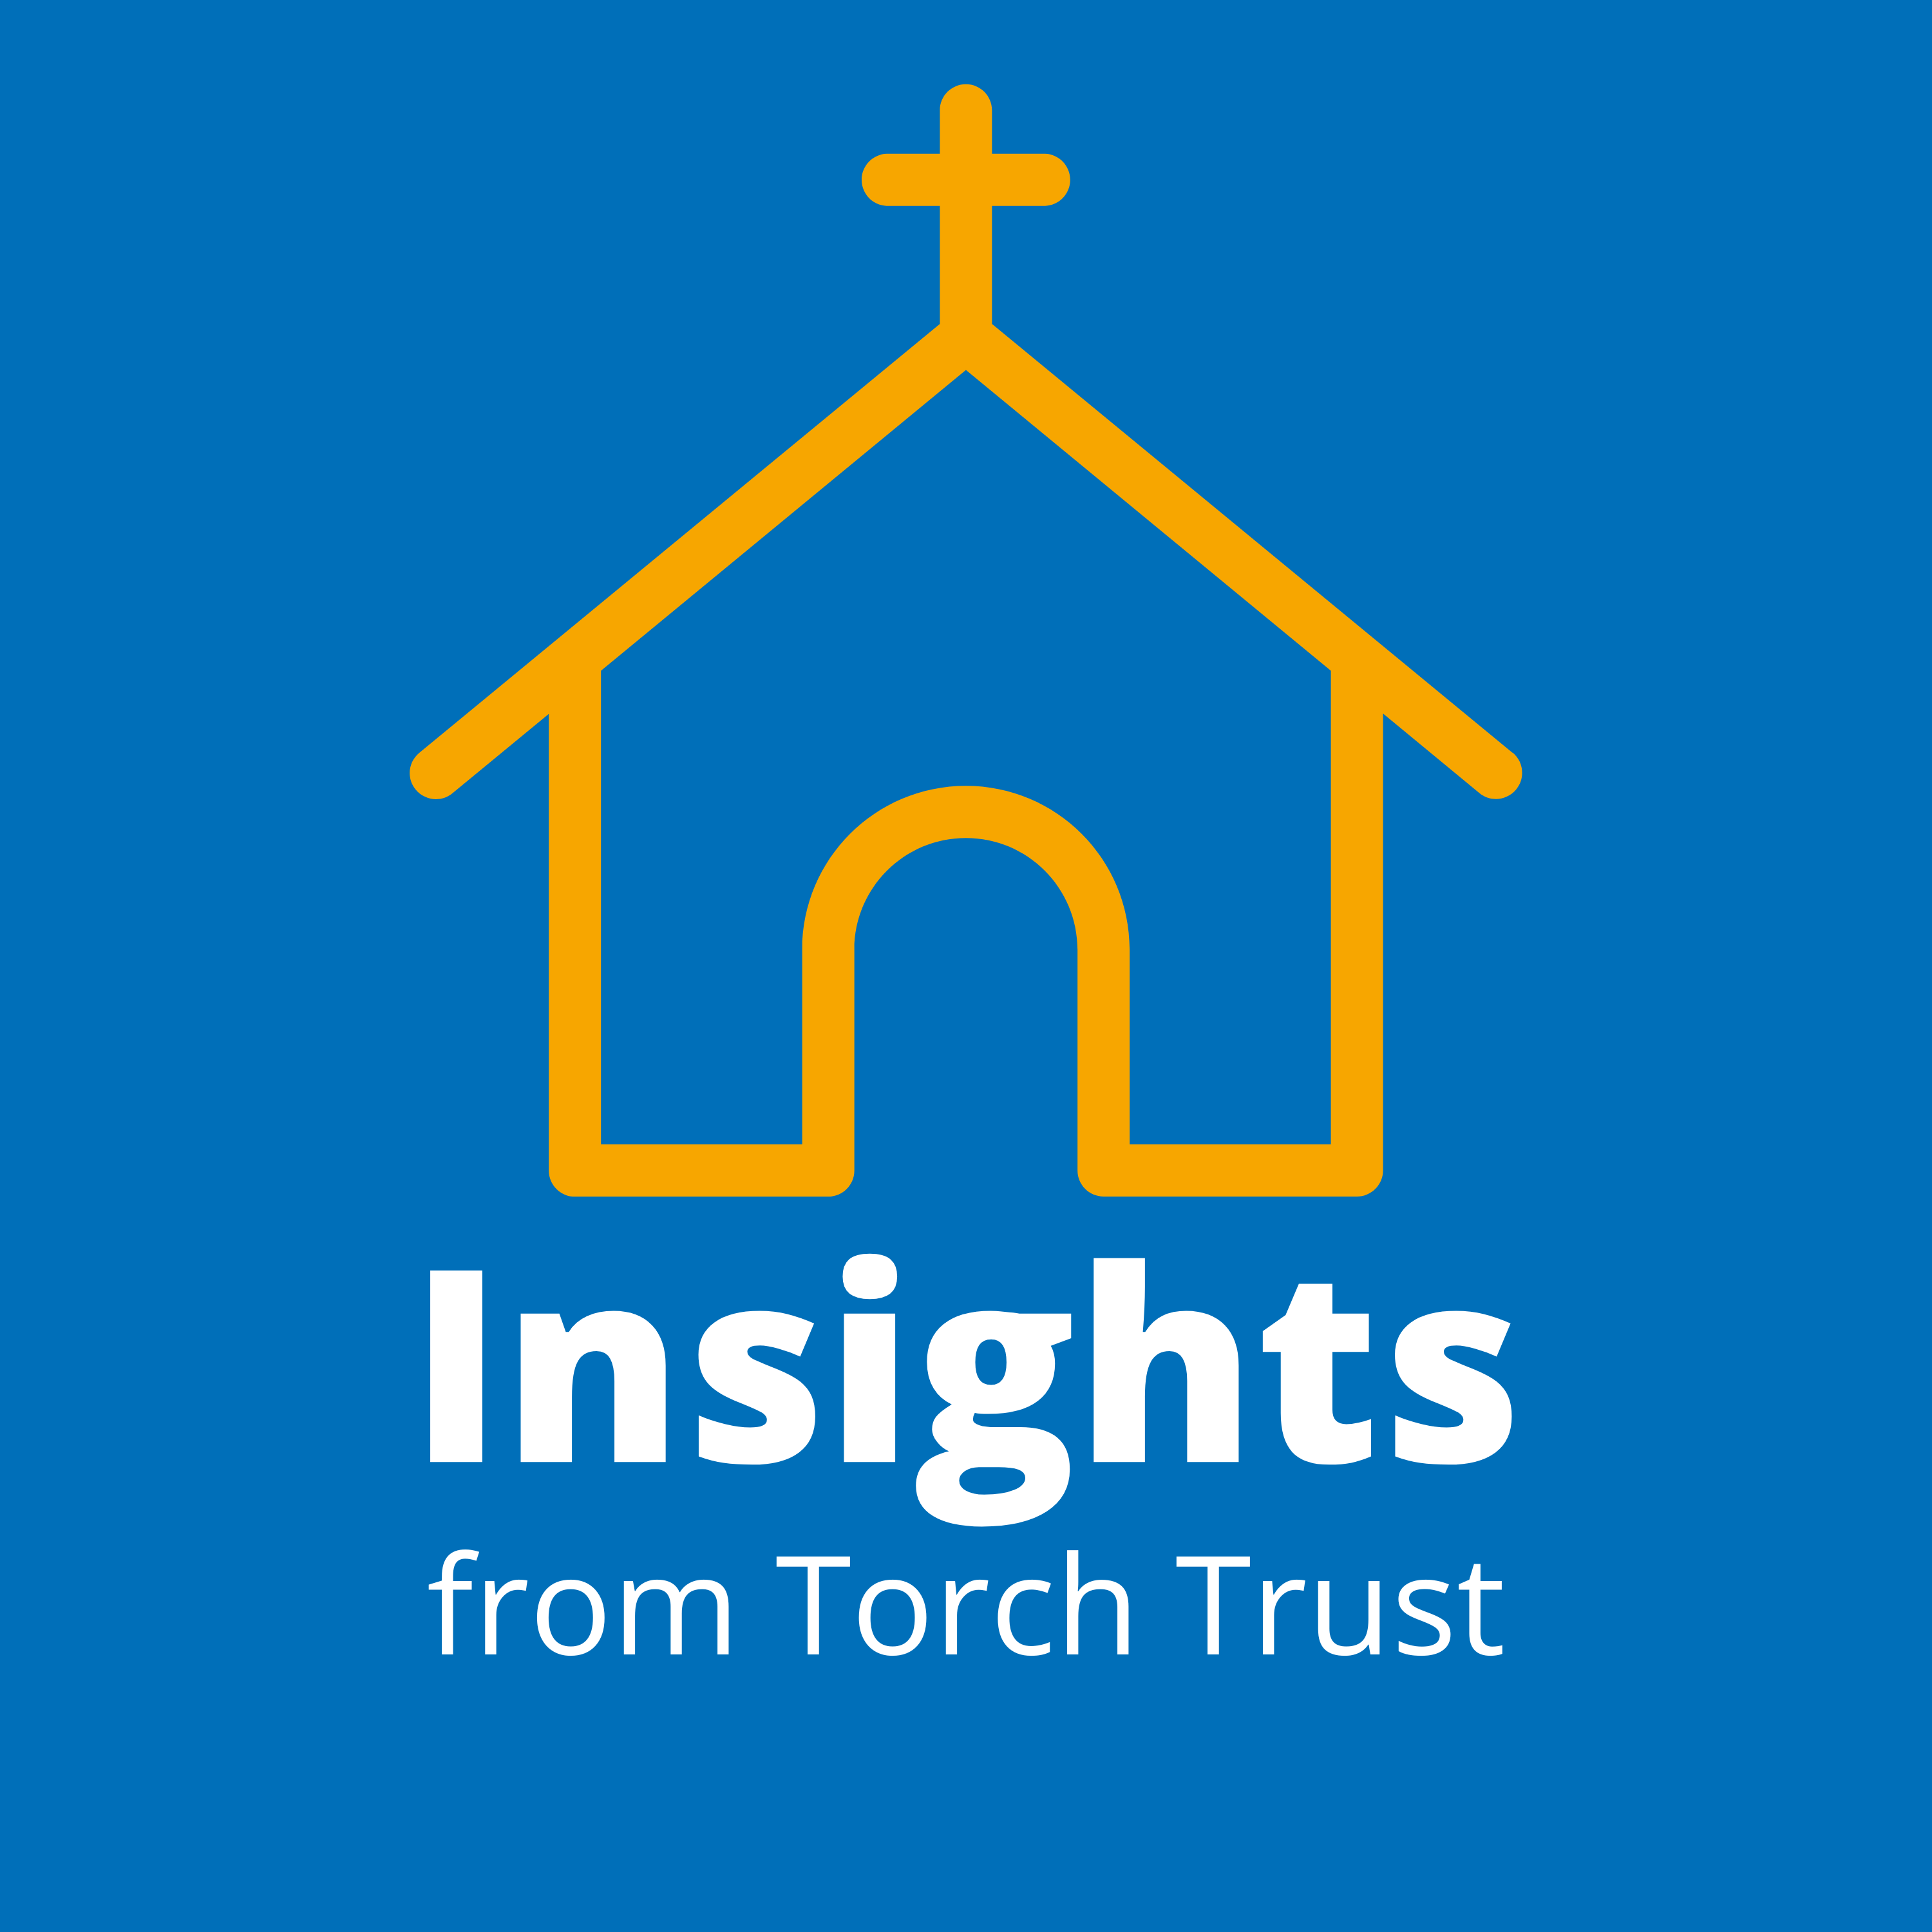 Insights from Torch Trust